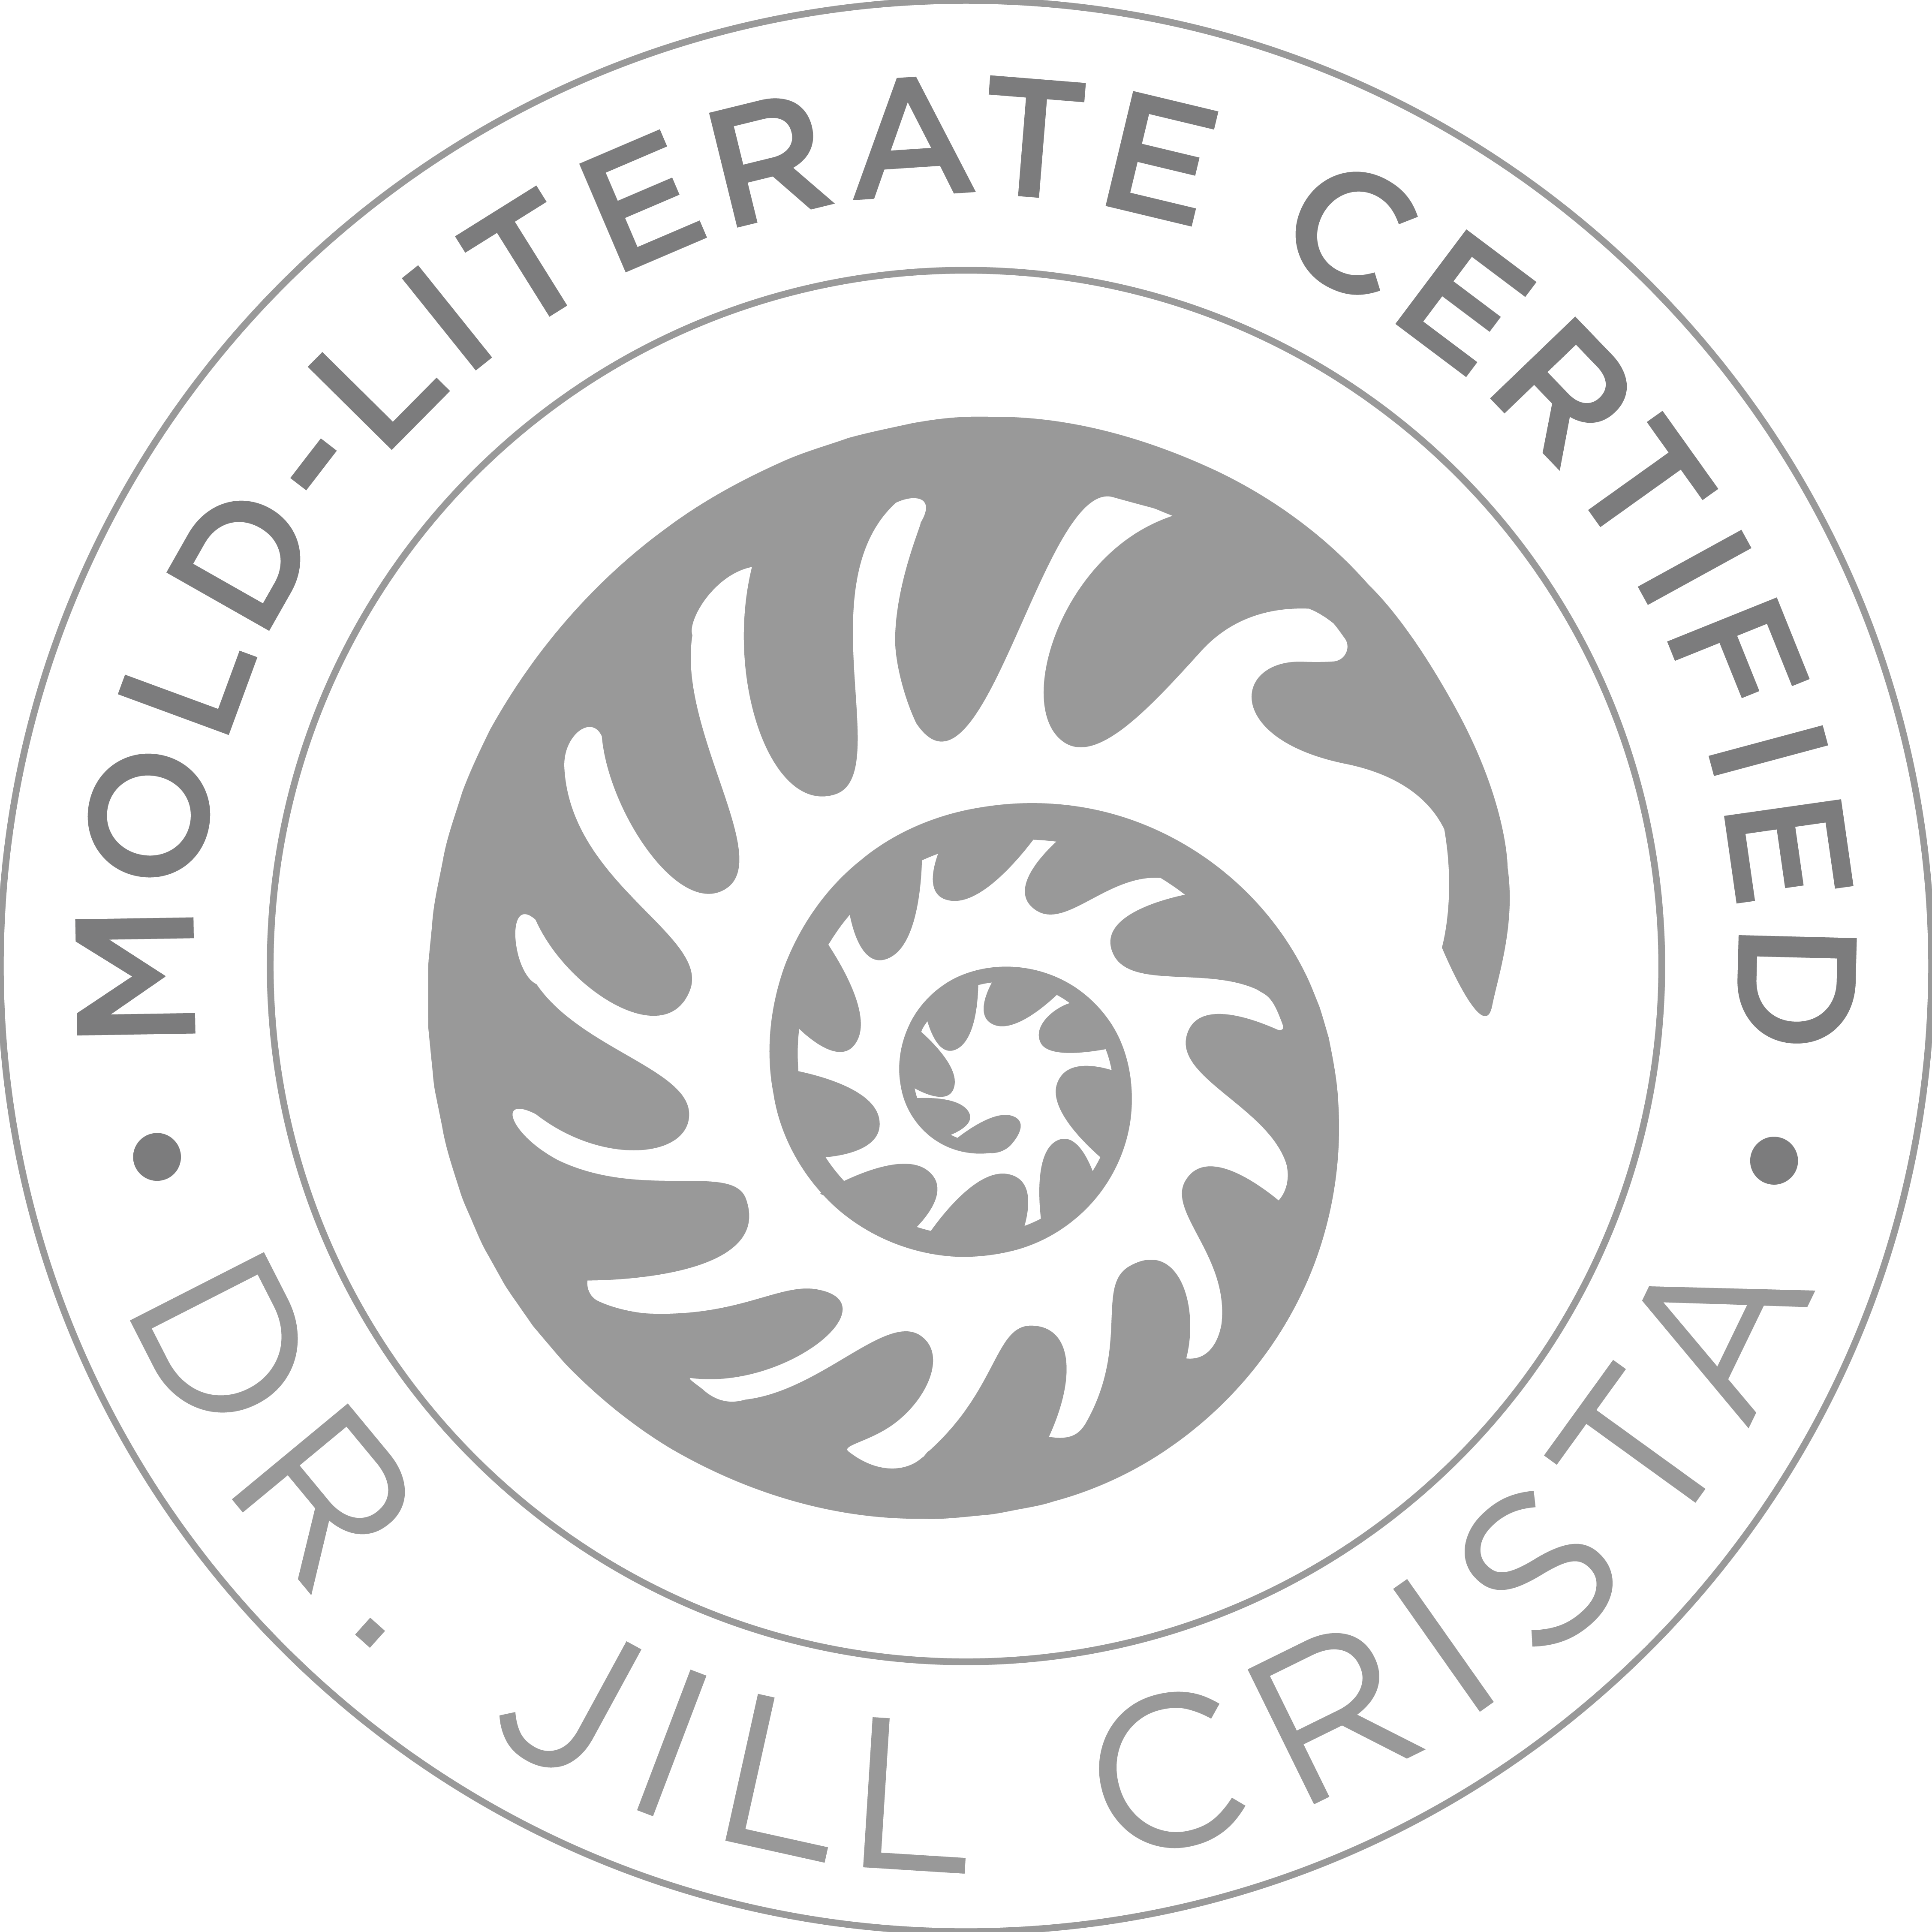 Mold-Literate Certified stamp